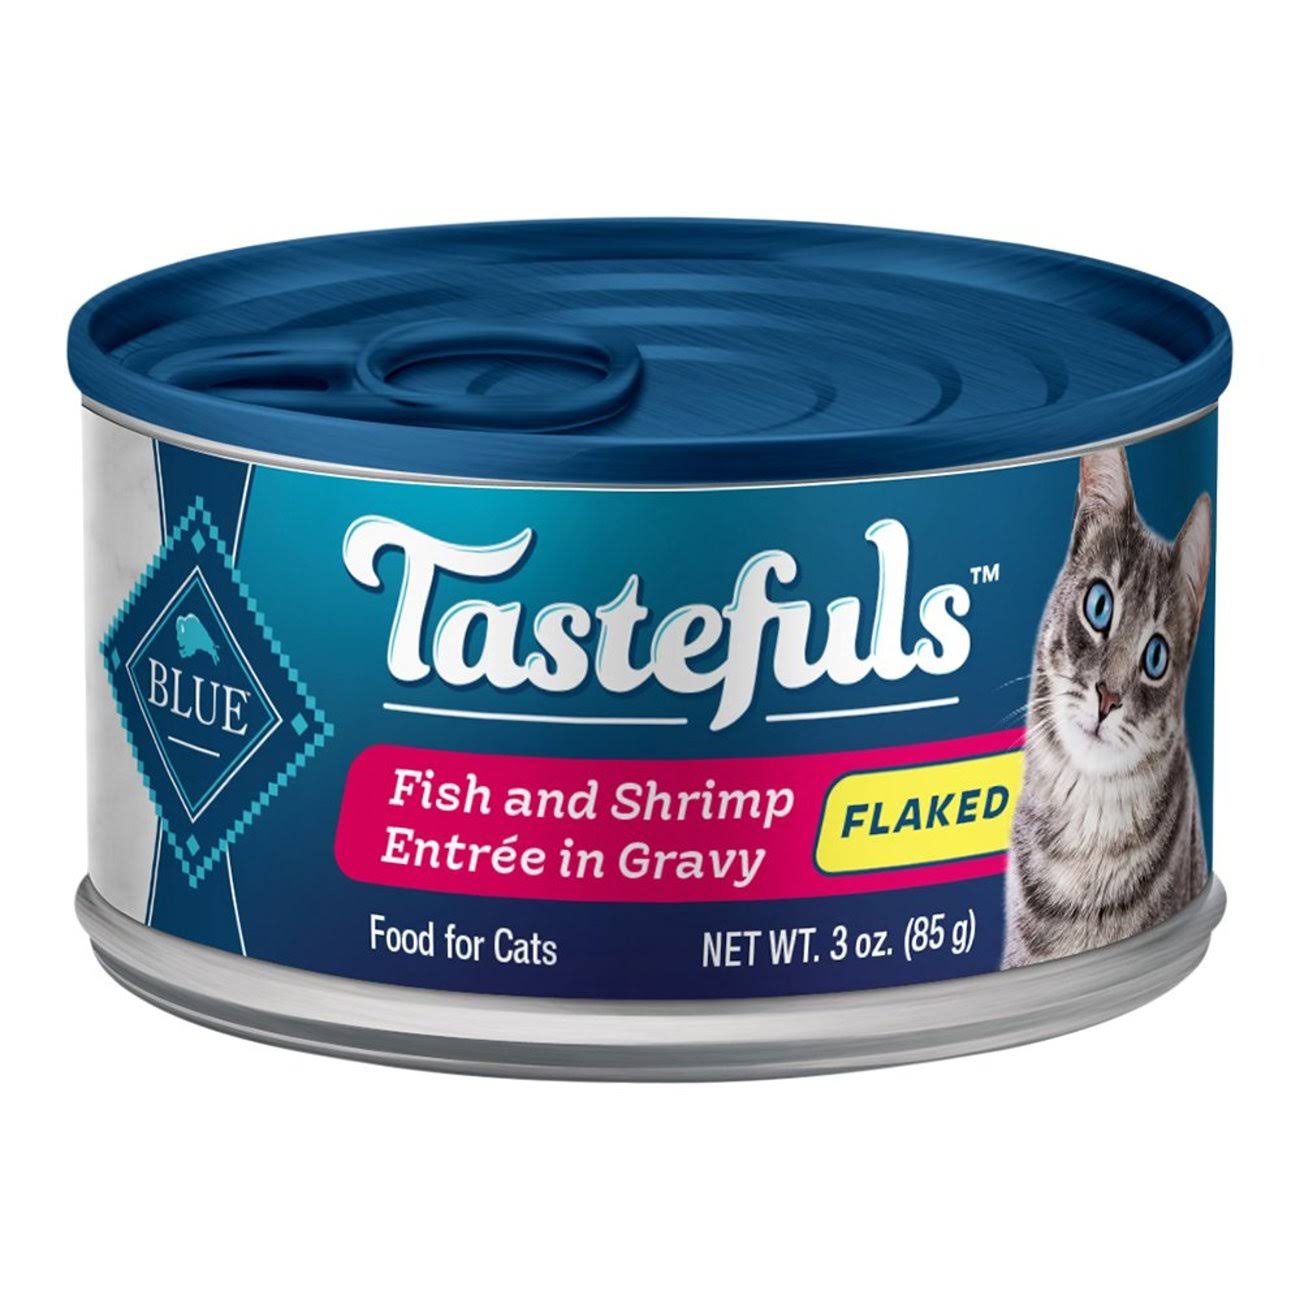 Blue Buffalo Blue Tastefuls Food For Cats, Fish and Shrimp Entree in Gravy, Flaked, Adult - 3 oz